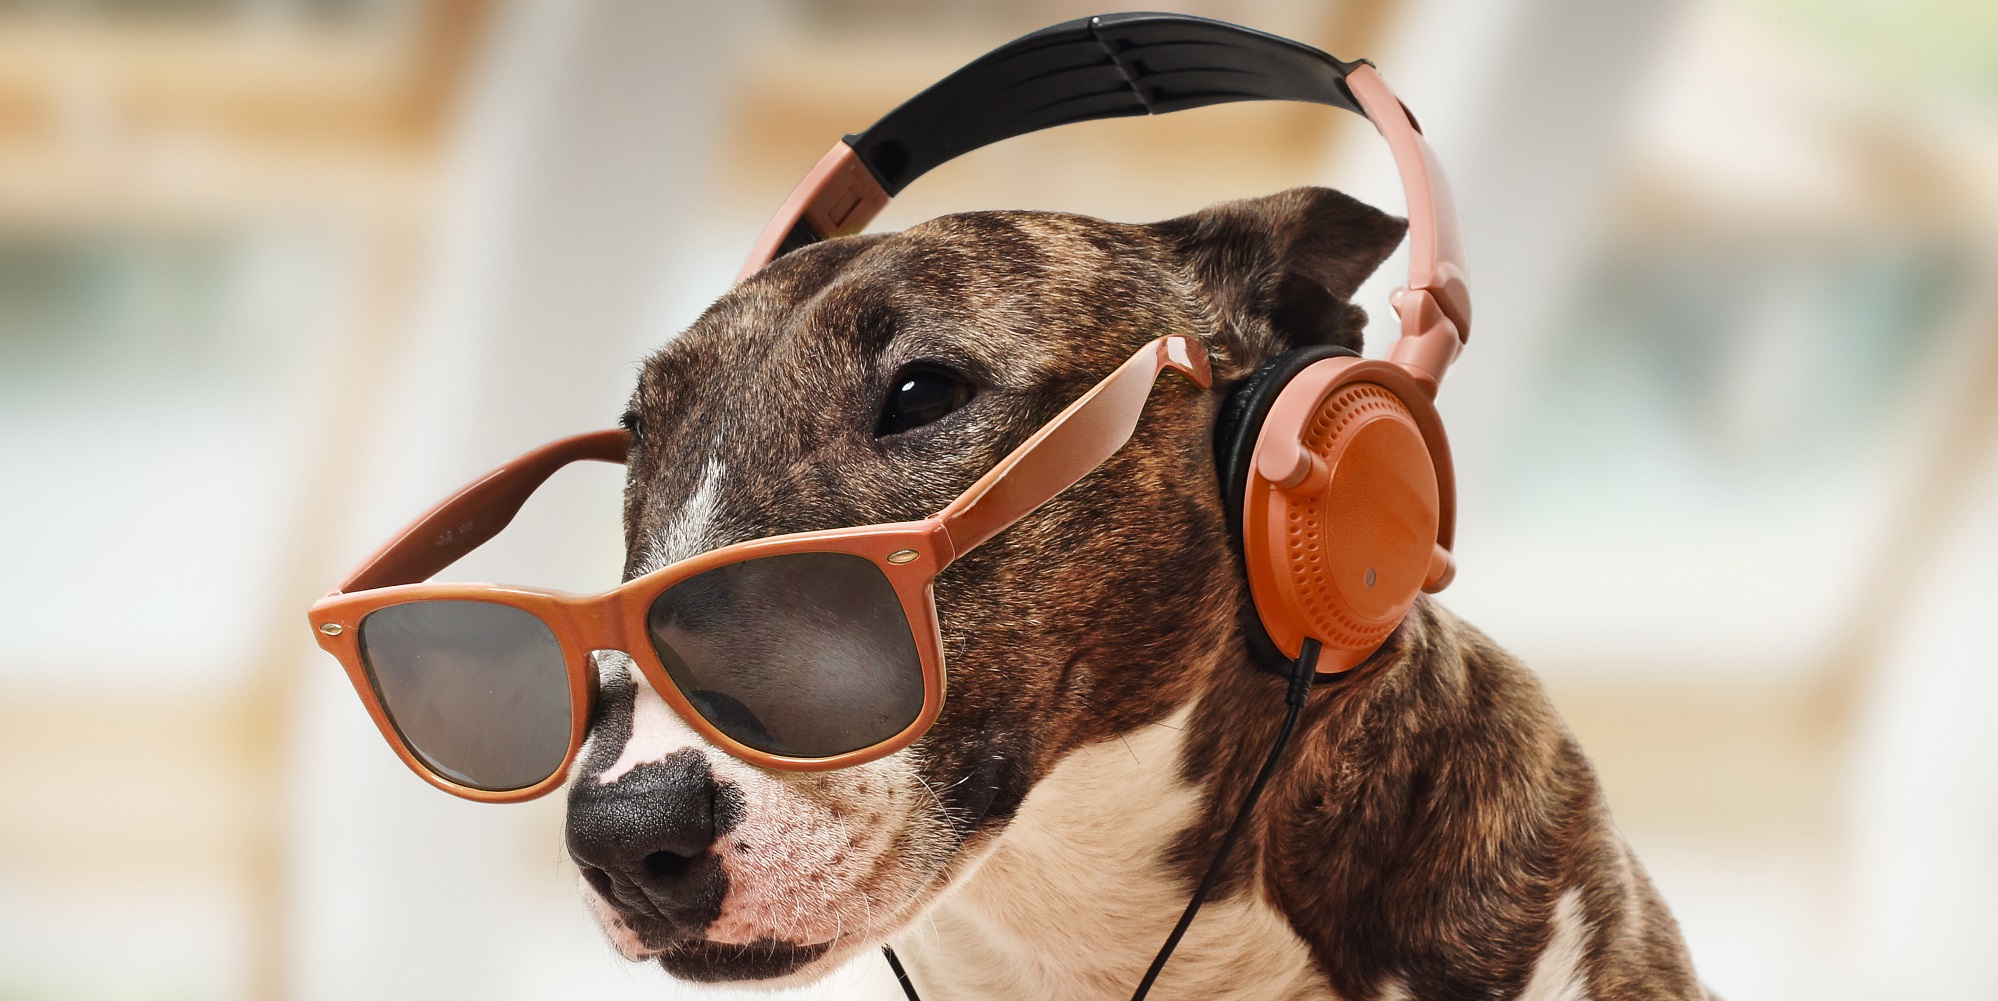 Which Big Dog And Small Dog Are You A Combination Of? 🐶 Miniature Bull Terrier is listening to music